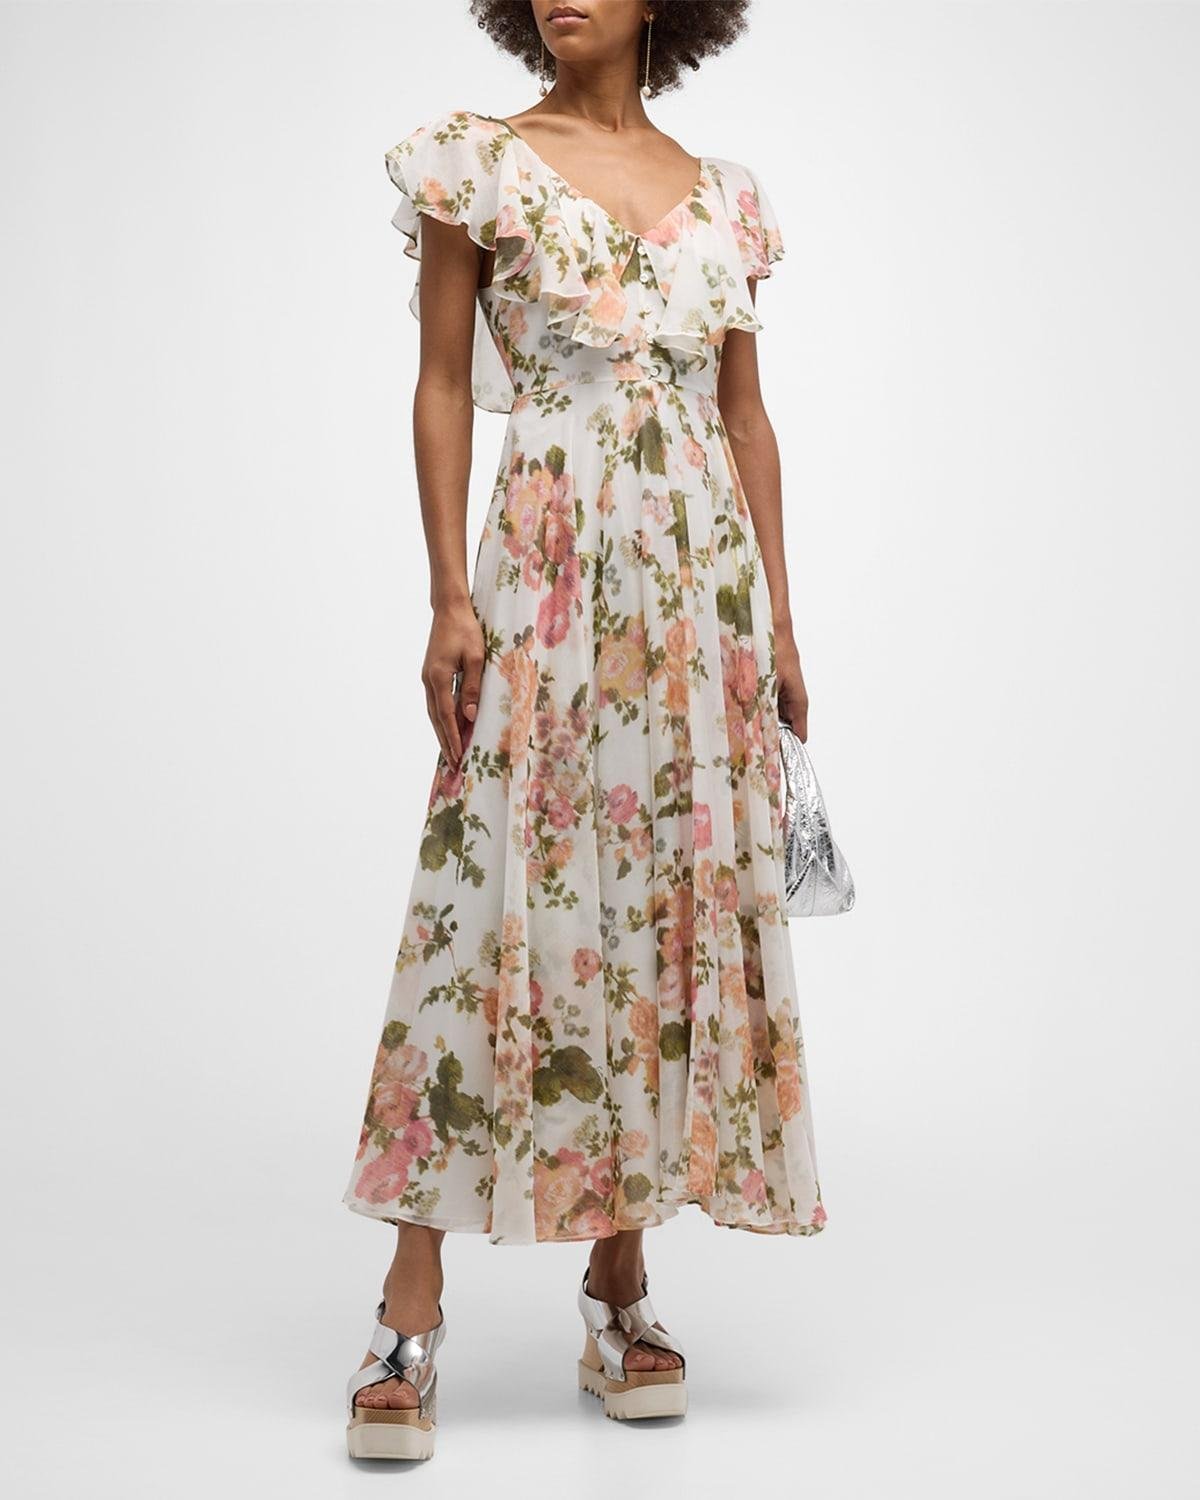 Floral Print Midi Dress with Ruffle Detail by ERDEM